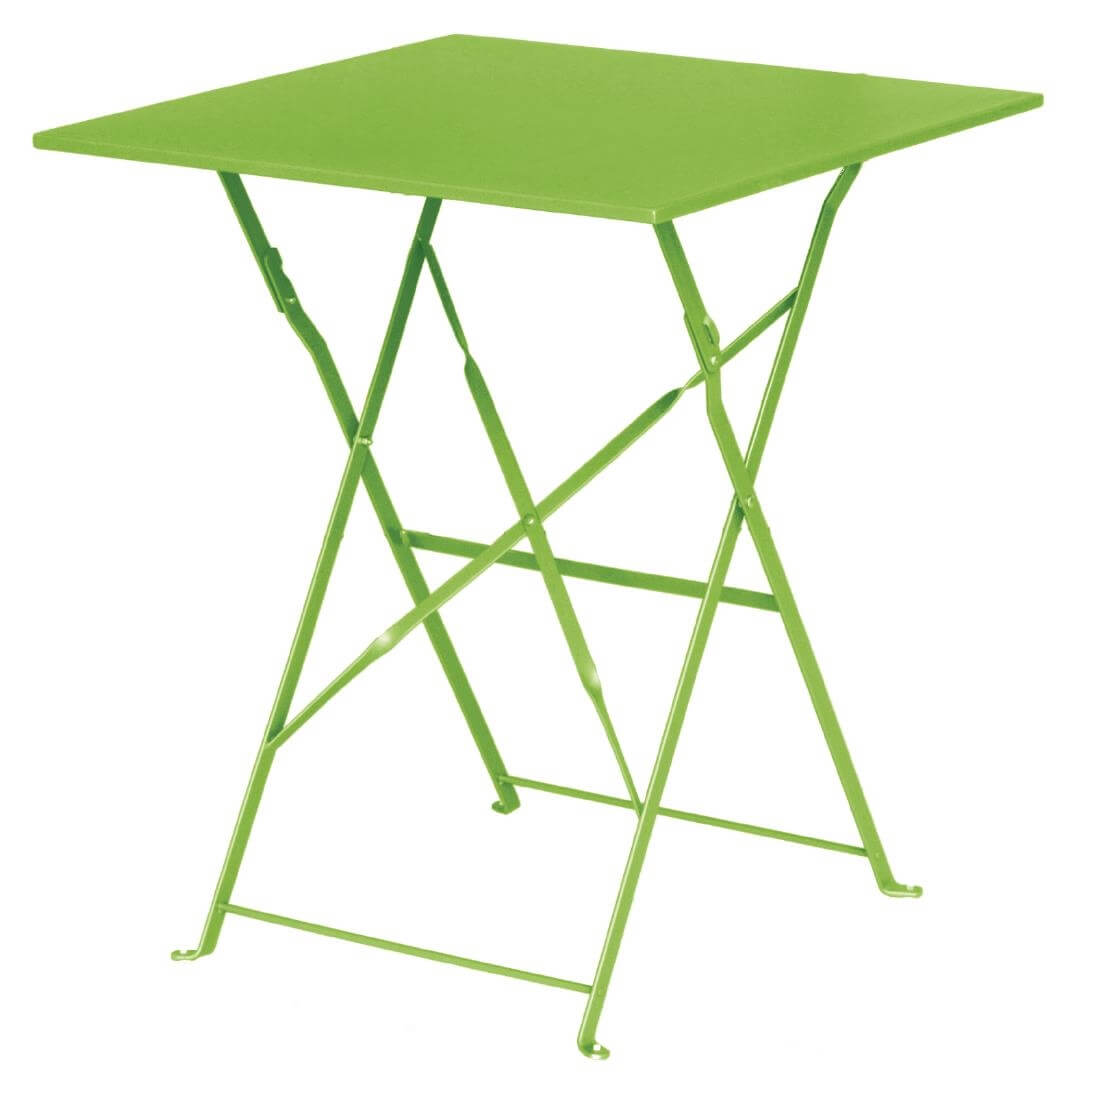 Steel Folding Table Square - Lime